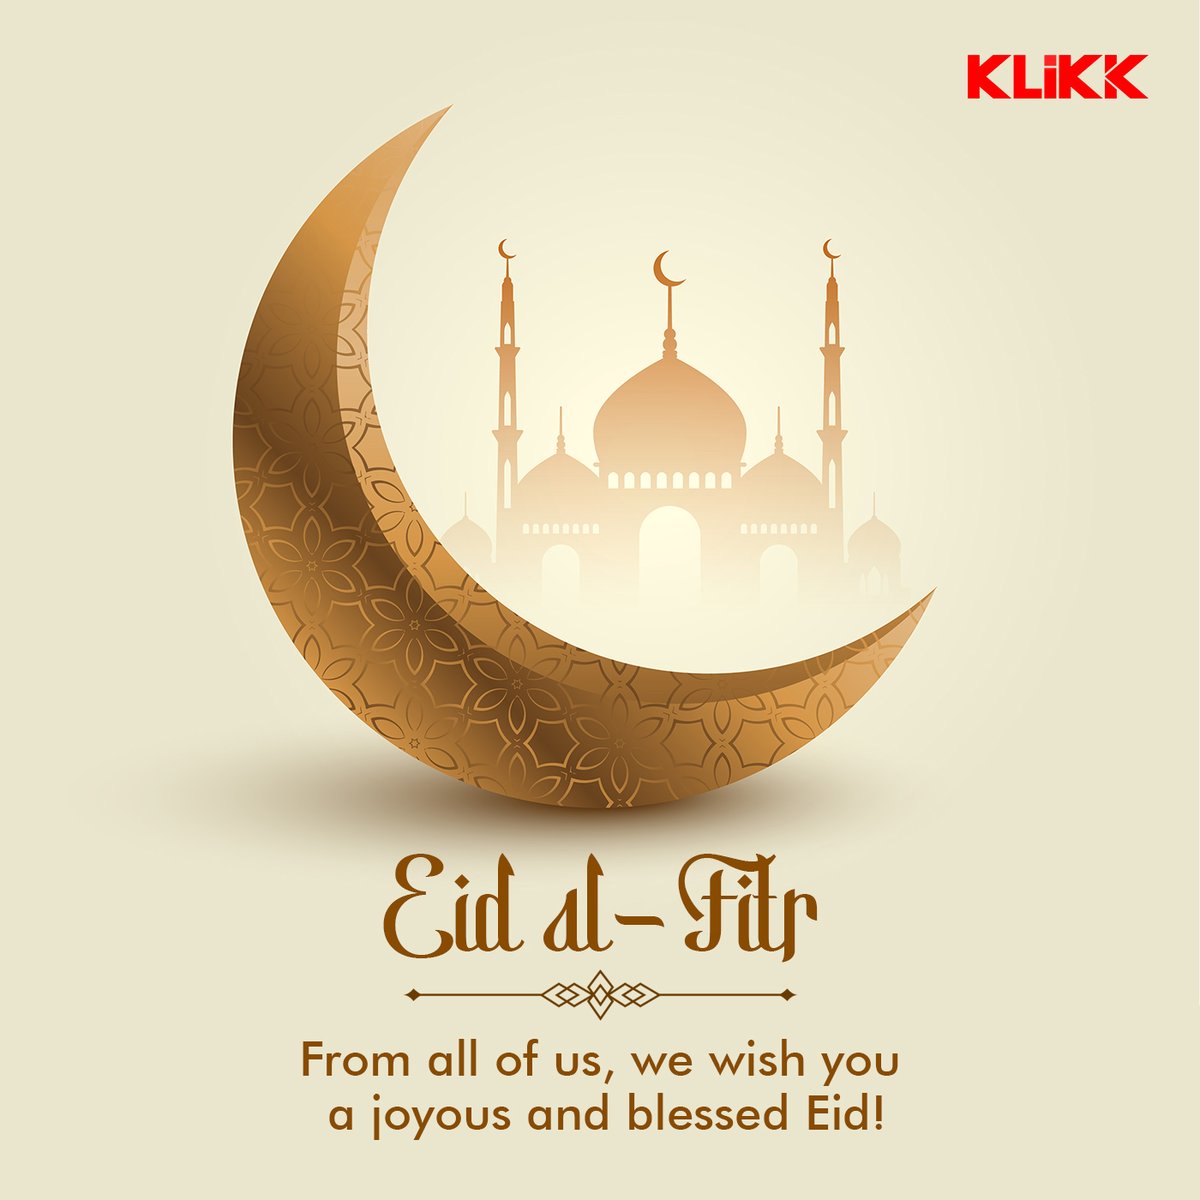 May the joyous occasion of Eid al-Fitr bring blessings, peace, and prosperity to you and your loved ones. 🌙✨ Eid Mubarak ✨🌙 #Klikk #eidmubarak